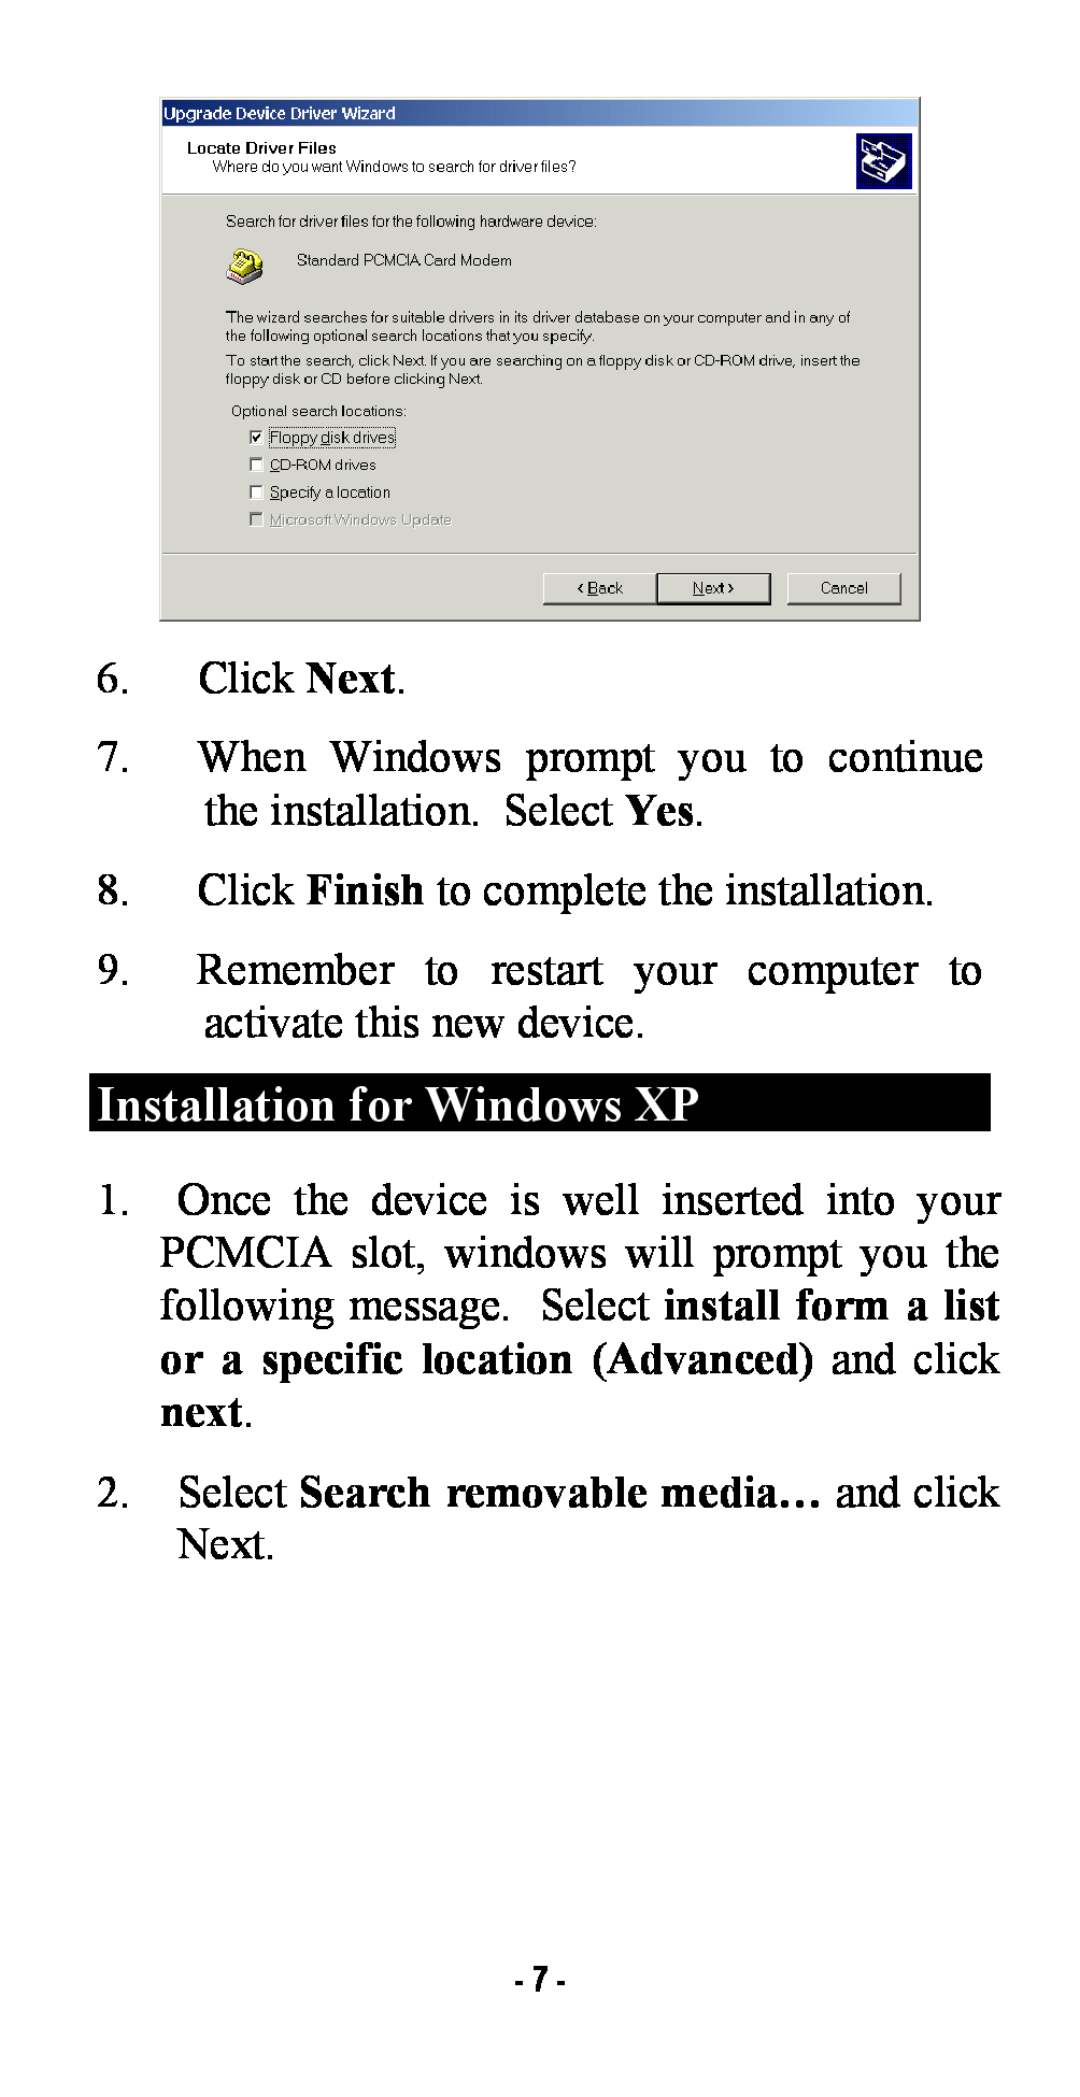 Abocom FM560MX manual Installation for Windows XP, Select Search removable media… and click Next 